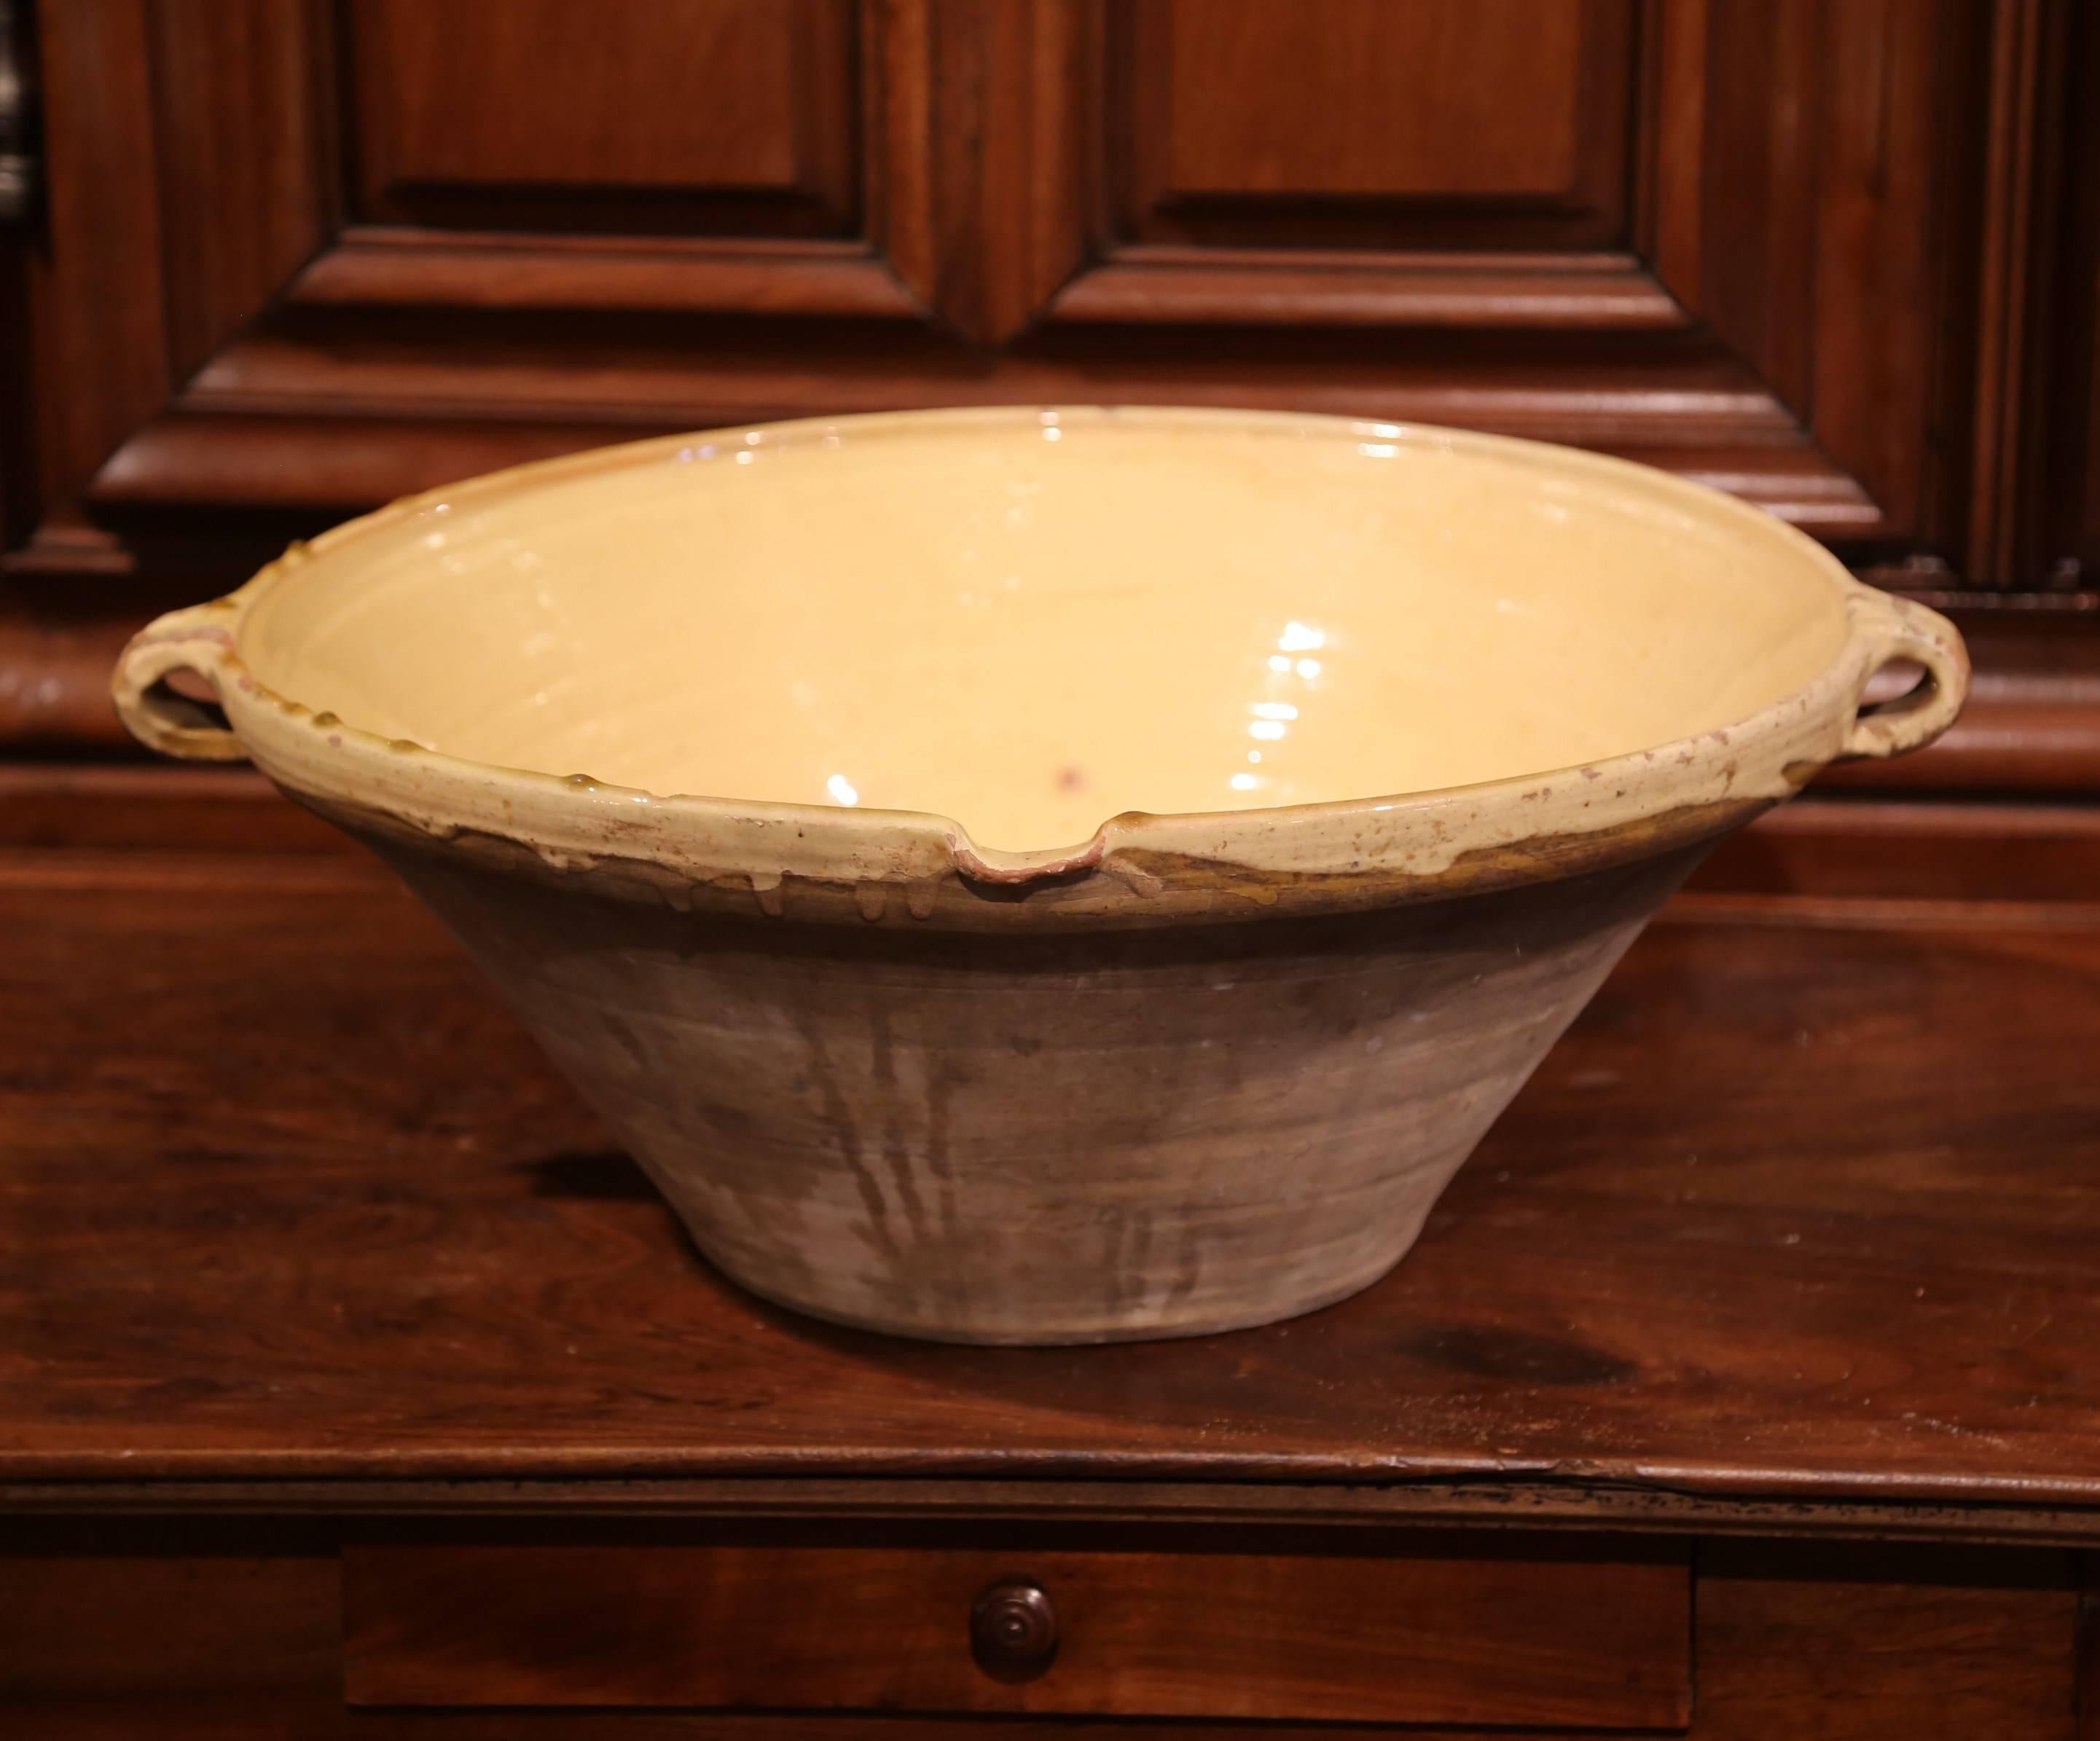 Beautiful antique Tian (Provencal term for bowl) from southern France; crafted in Provence, circa 1870, this round handmade terracotta bowl features two small handles, a server beak, and has a subtle yellow glaze on the inside with natural